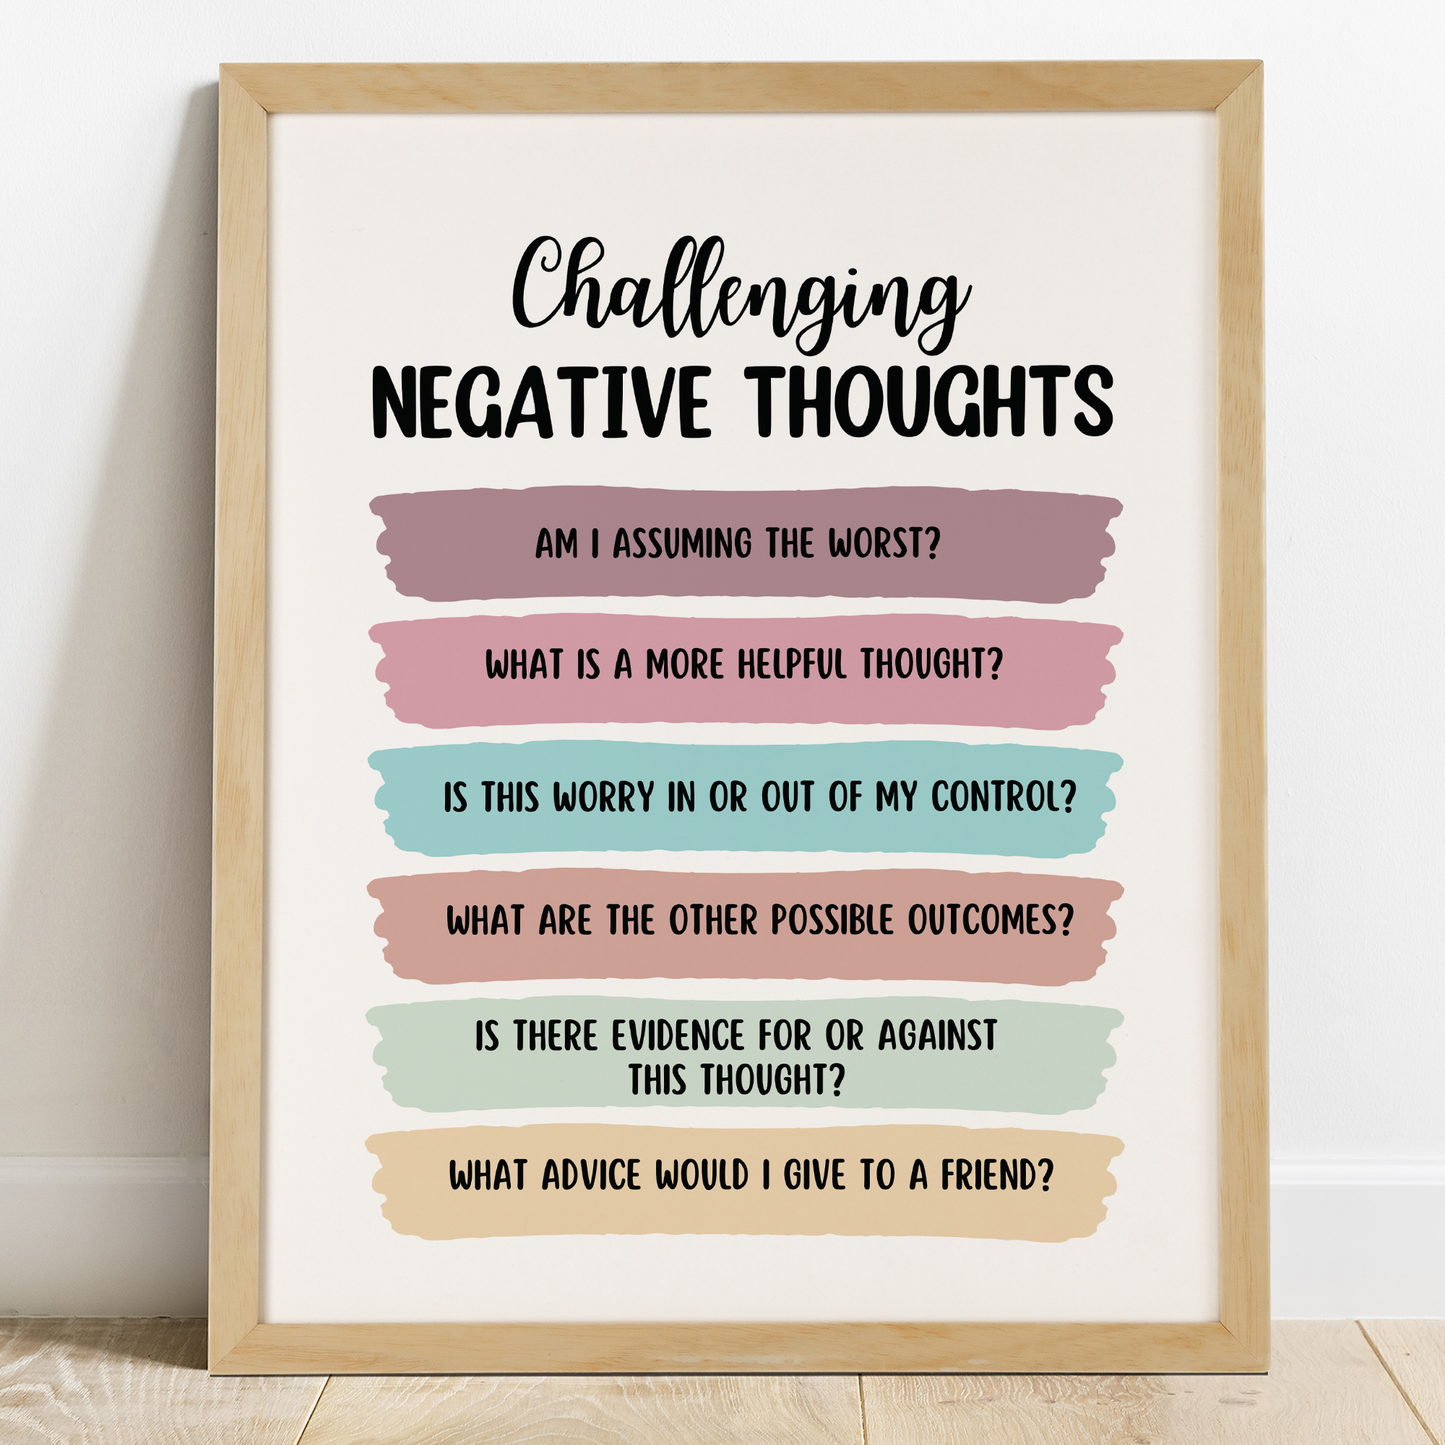 Challenging Negative Thoughts